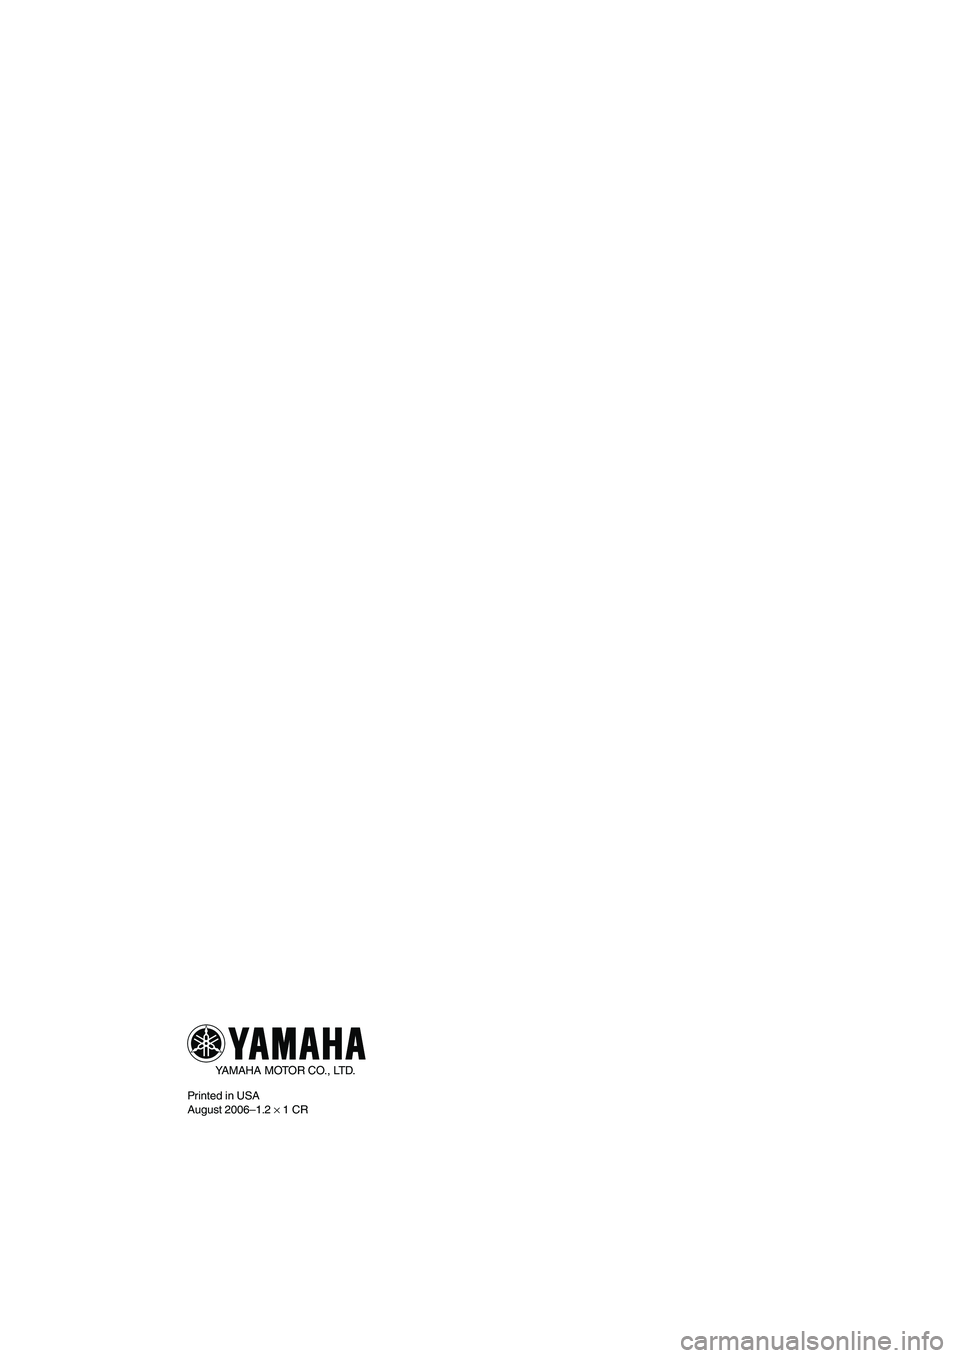 YAMAHA VX CRUISER 2007  Owners Manual YAMAHA MOTOR CO., LTD.
Printed in USA
August 2006–1.2 × 1 CR
UF1K72E0.book  Page 1  Wednesday, August 2, 2006  10:43 AM 